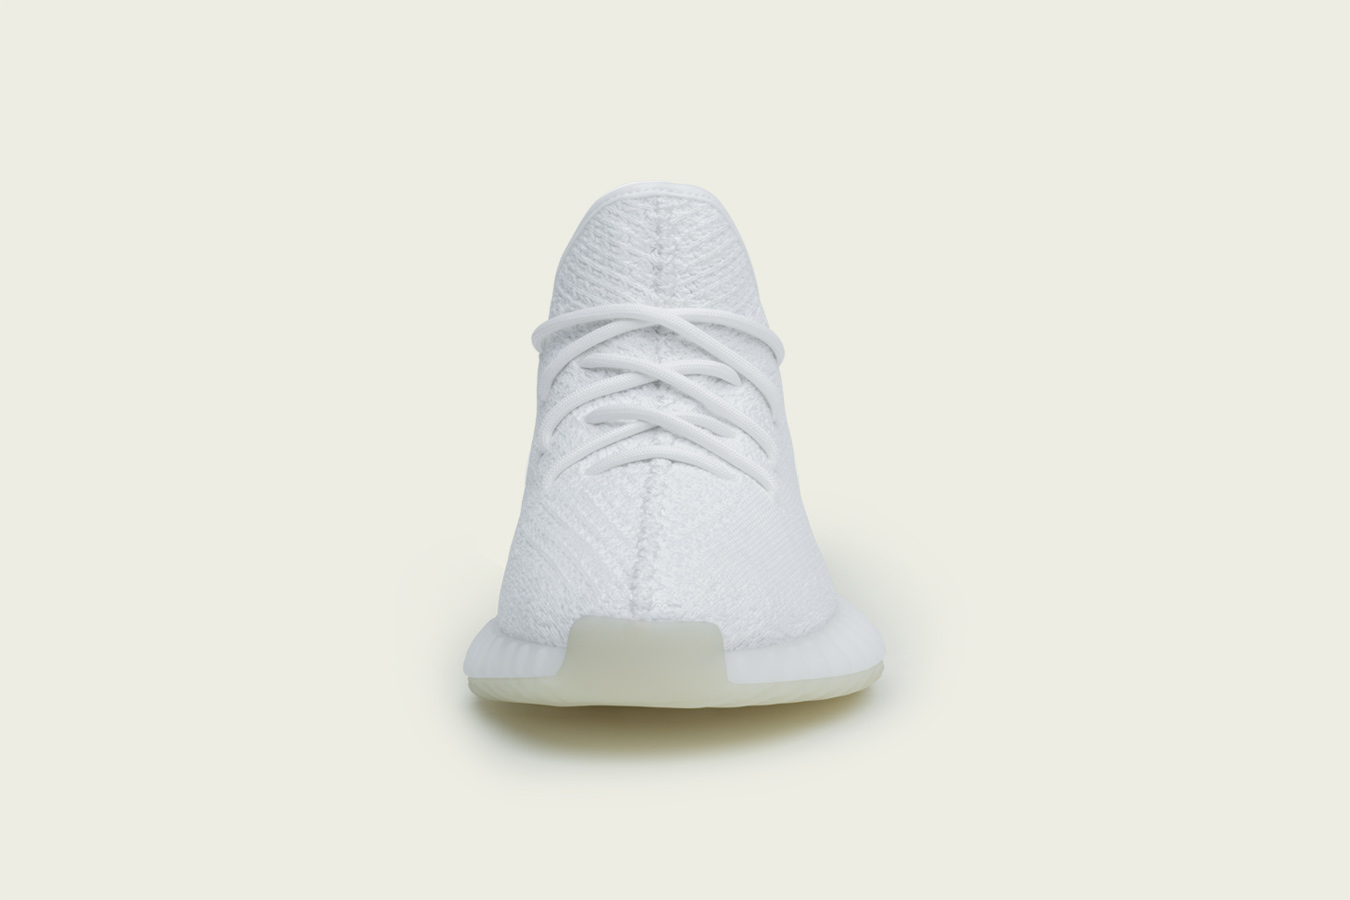 adidas YEEZY BOOST 350 V2 – Cream White | sneakerb0b RELEASES